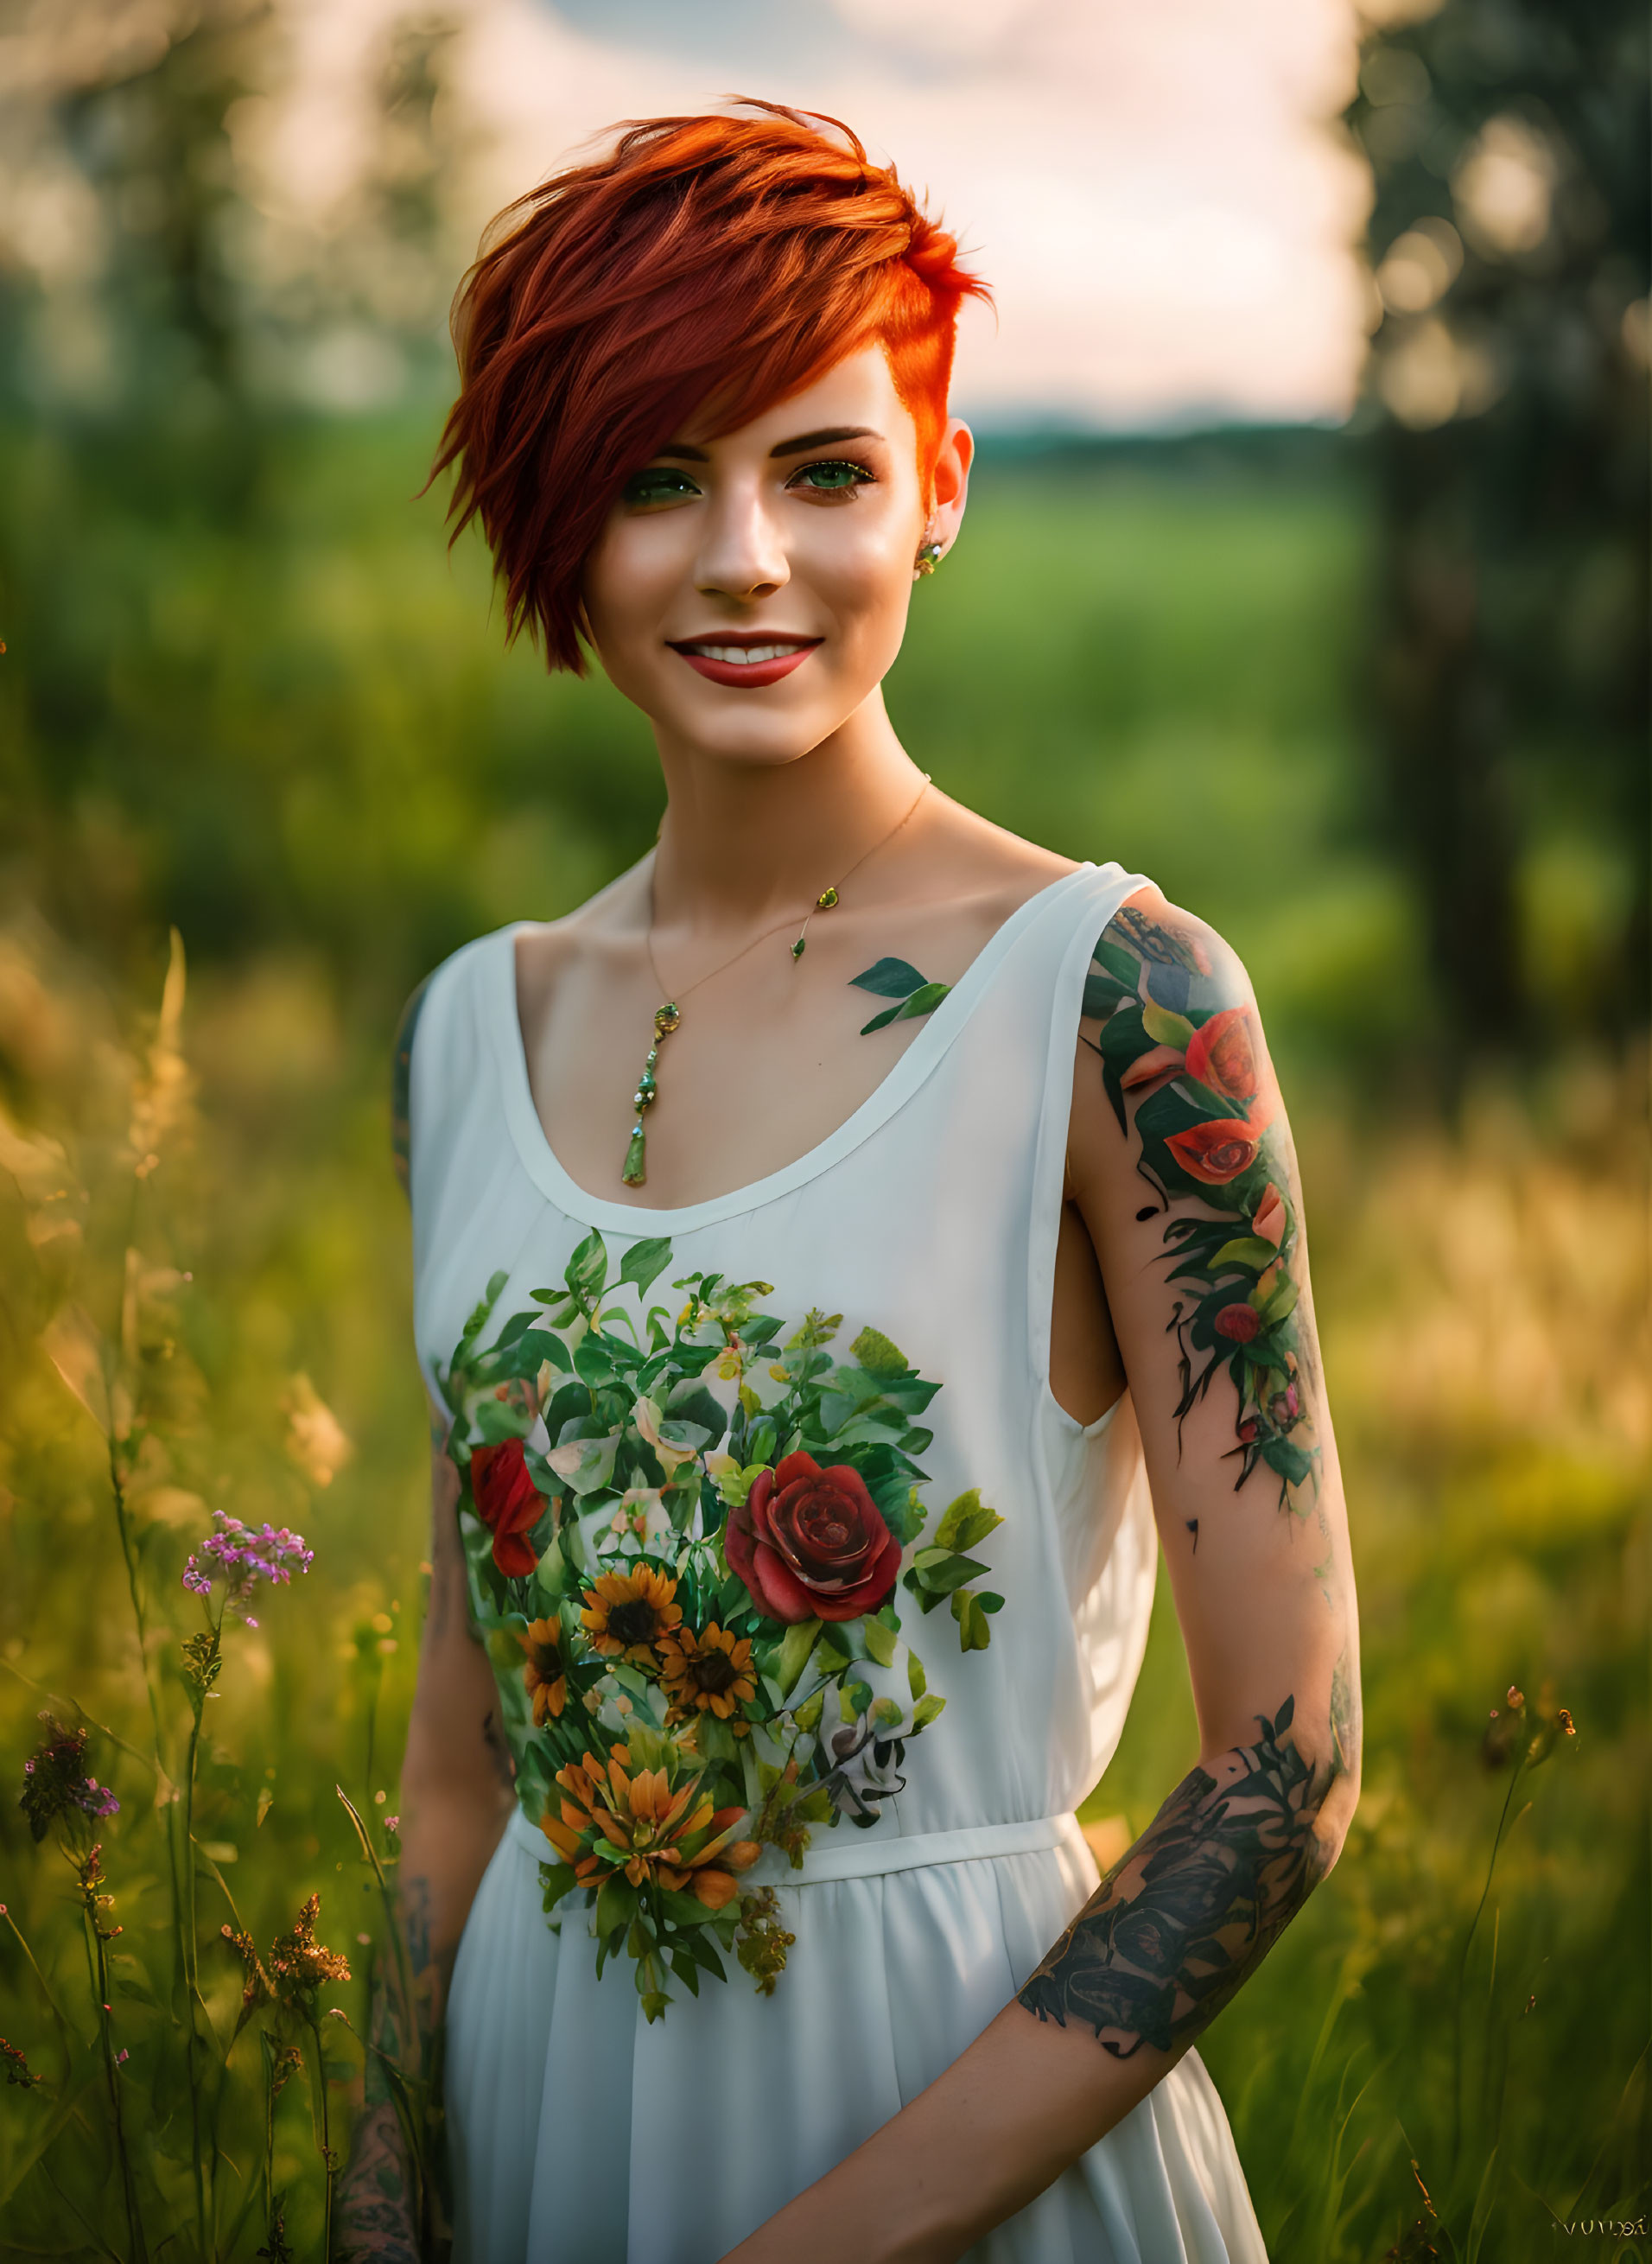 Girl with a realy short red haircut